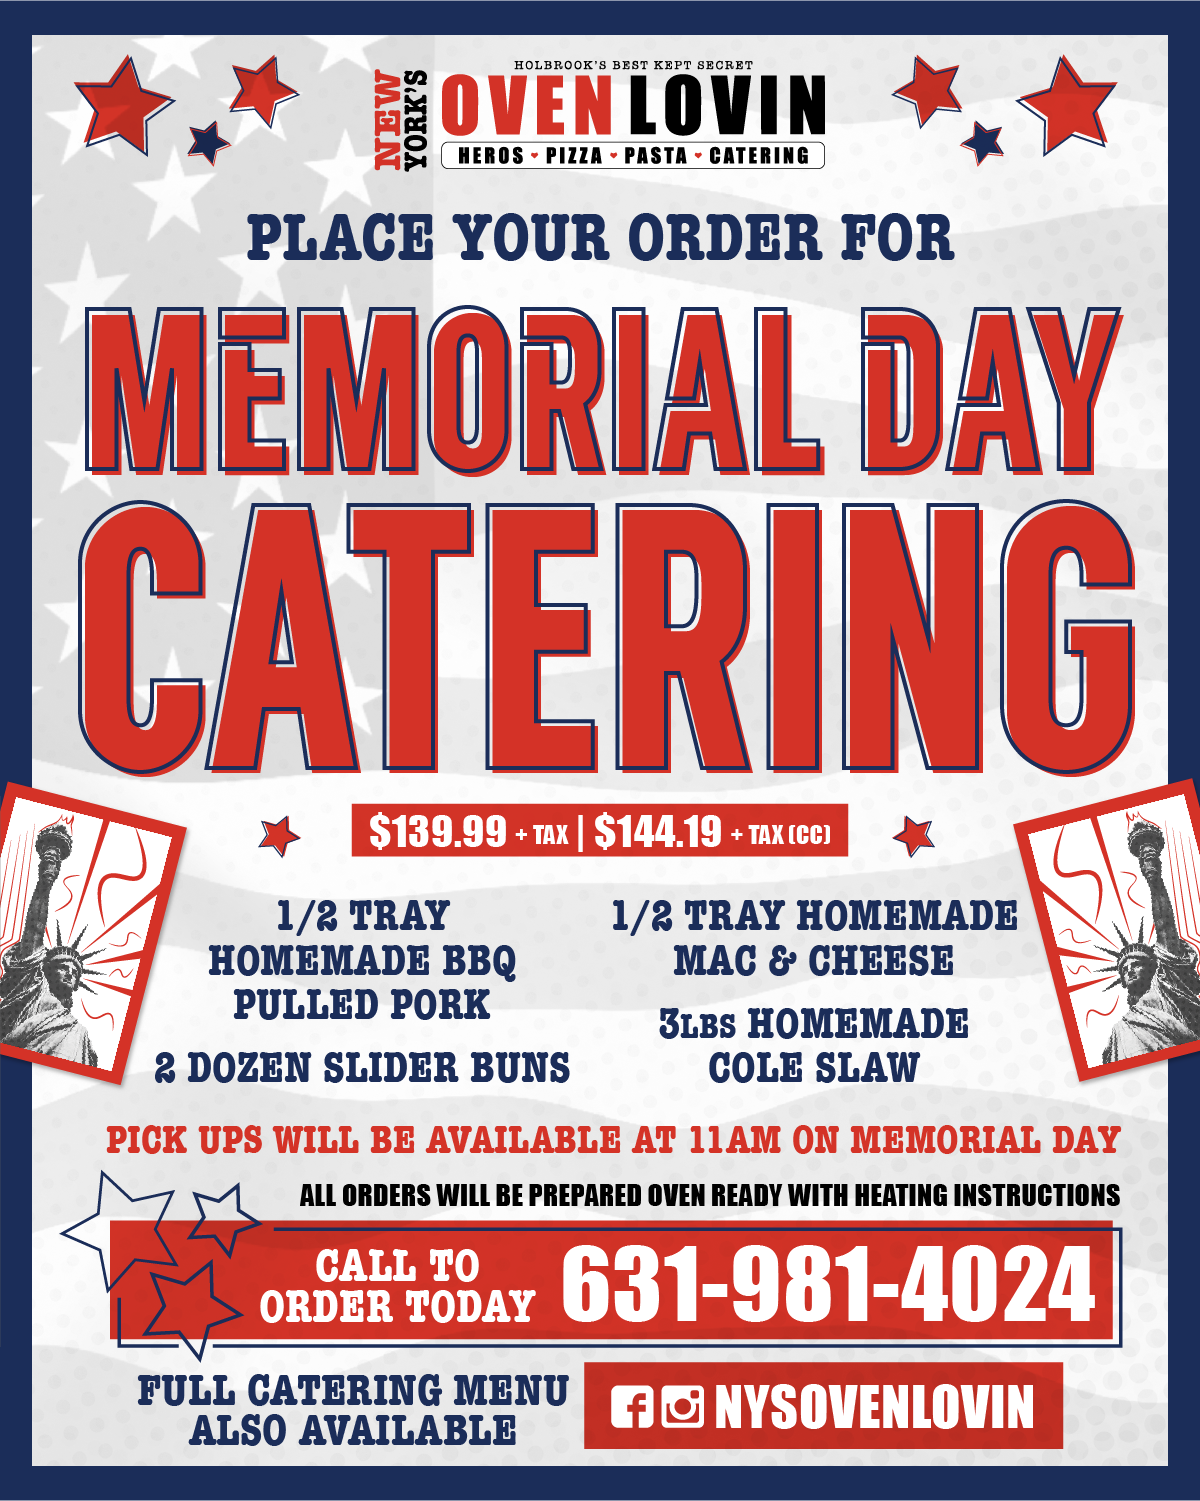 PLACE YOUR ORDER FOR MEMORIAL DAY CATERING $139.99 + TAX | $144.19 + TAX ICE) 1/2 TRAY HOMEMADE BBQ PULLED PORK 2 DOZEN SLIDER BUNS 1/2 TRAY HOMEMADE MAC & CHEESE 3LBS HOMEMADE COLE SLAW PICK UPS WILL BE AVAILABLE AT 11AM ON MEMORIAL DAY ALL ORDERS WILL BE PREPARED OVEN READY WITH HEATING INSTRUCTIONS CALL TO ORGAN TODAY 631-981-4024 FULL CATERING MENU ONSOVENLOVIN